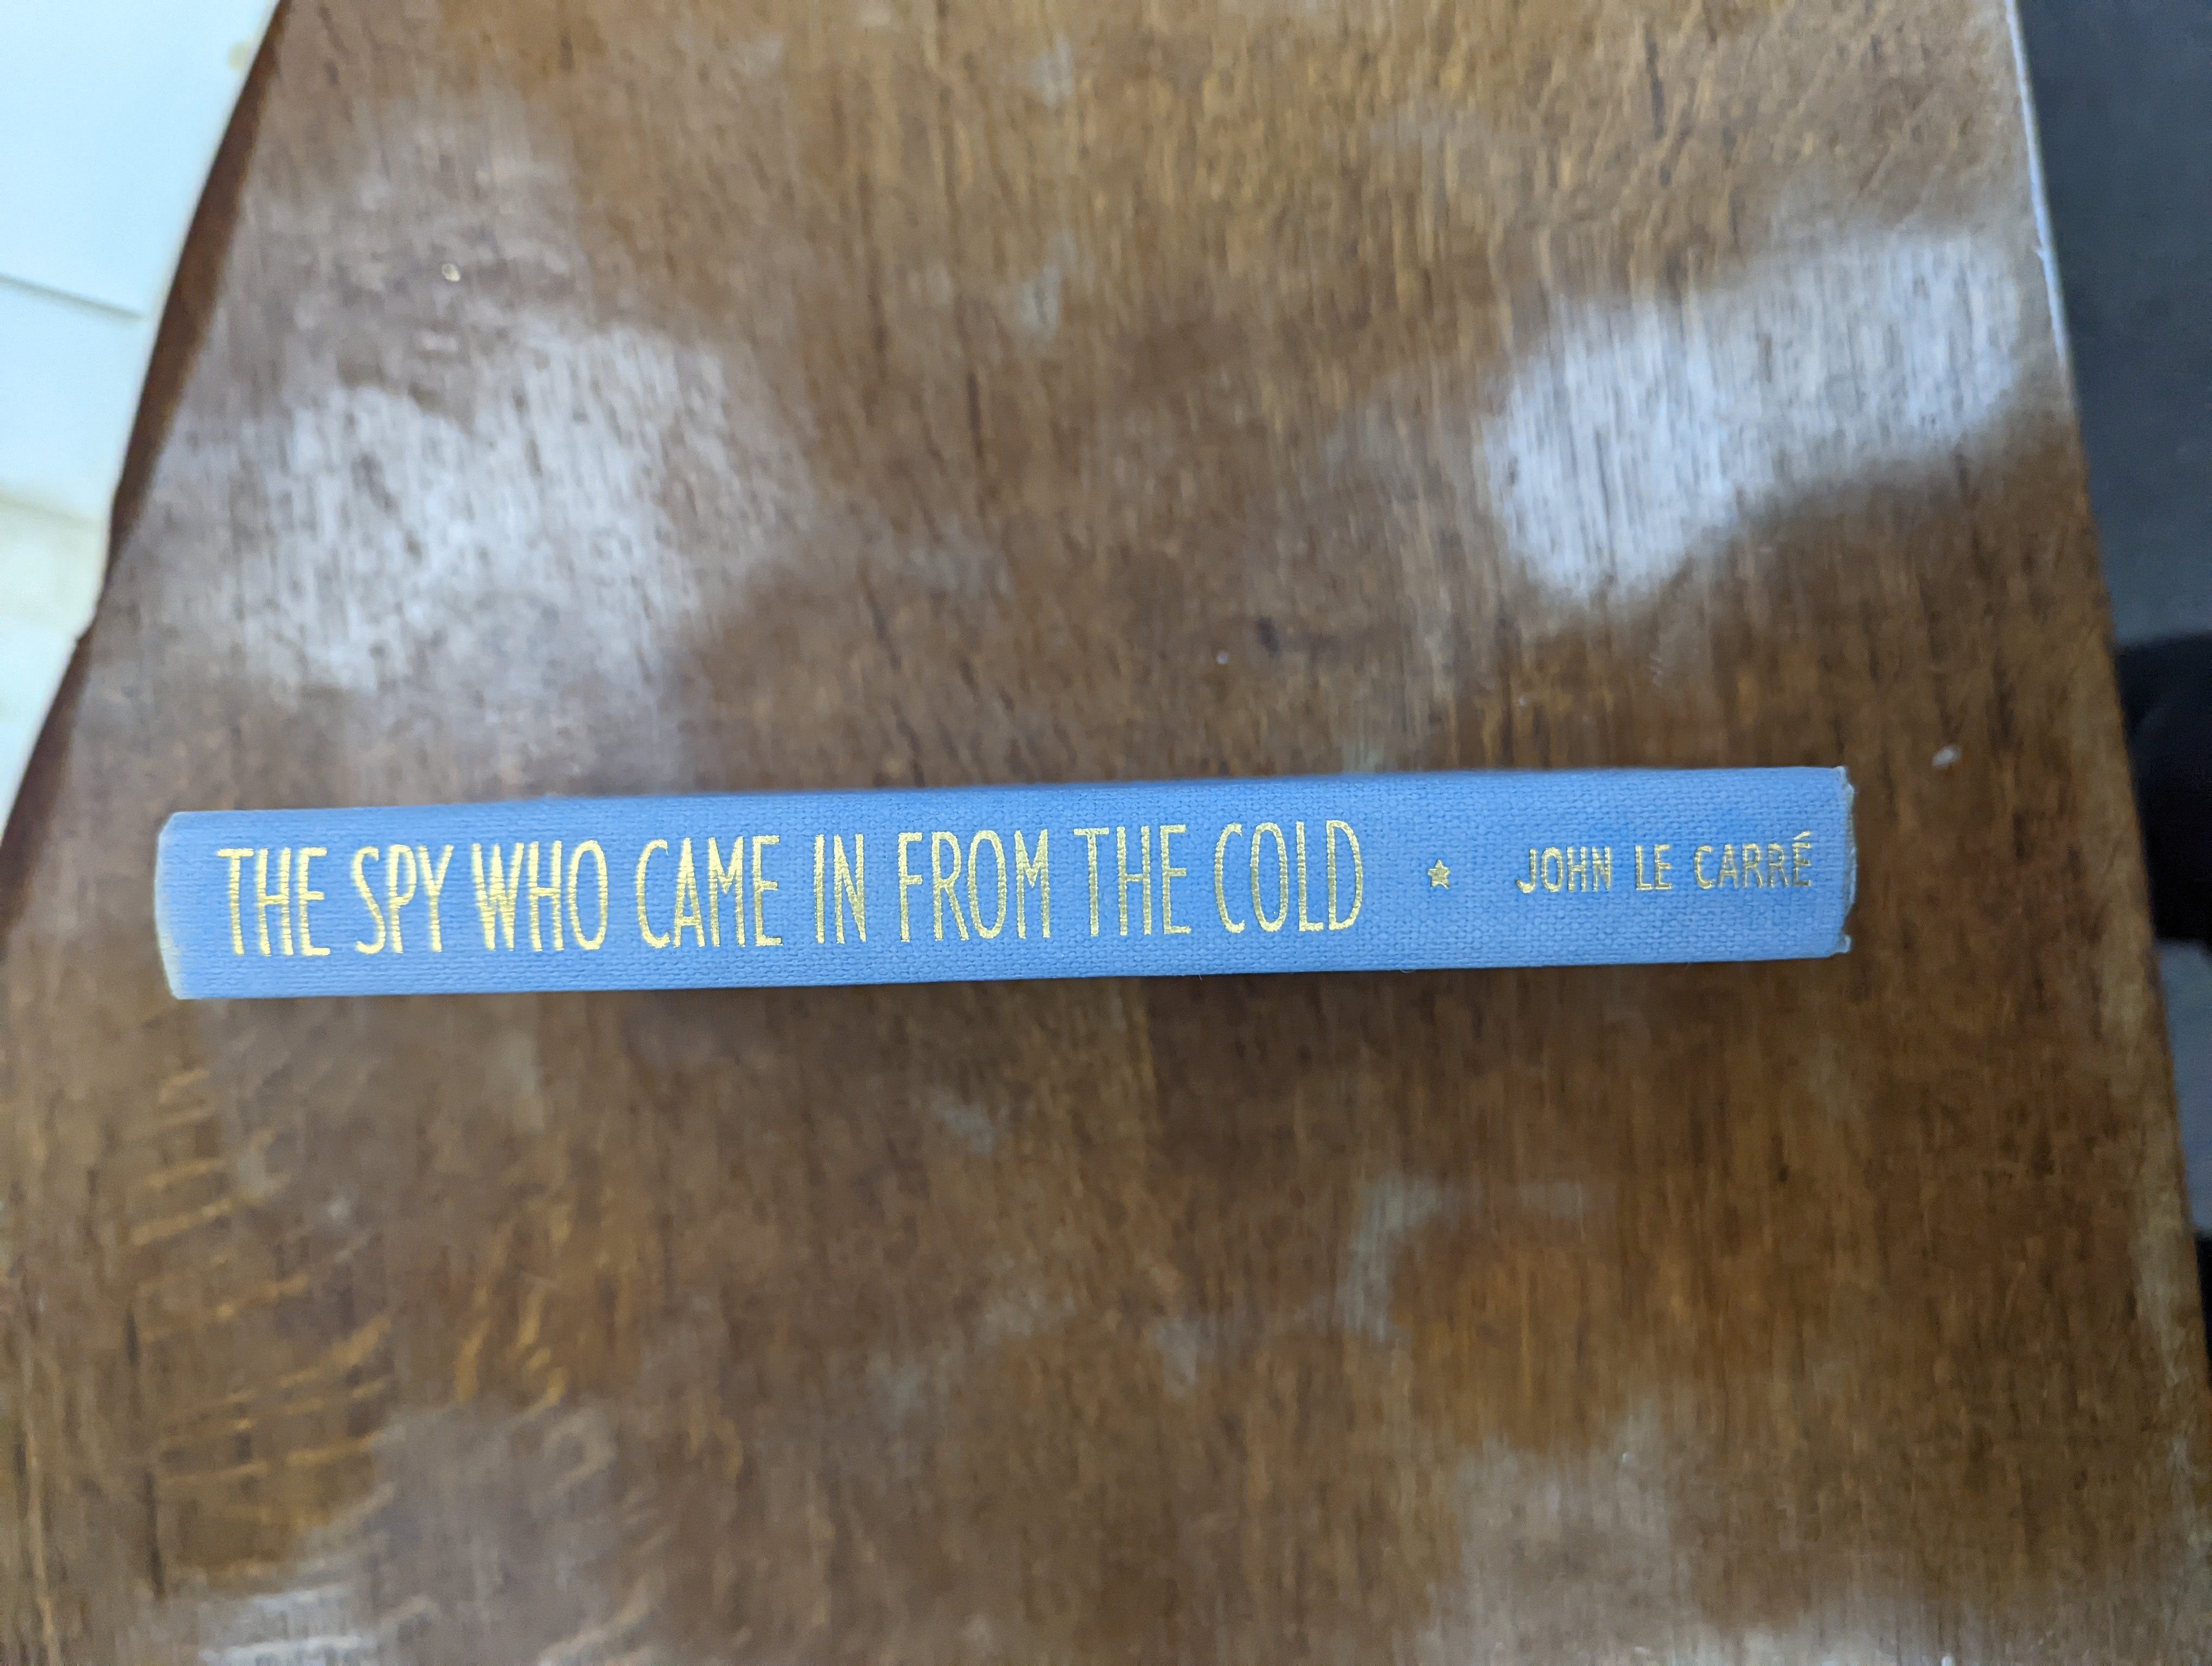 Le Carre, John - The Spy Who Came In From the Cold, 1st edition, 8vo, in unclipped d/j, with spine panel lightly sunned, jacket spine head chipped, Victor Gollancz, London, 1963